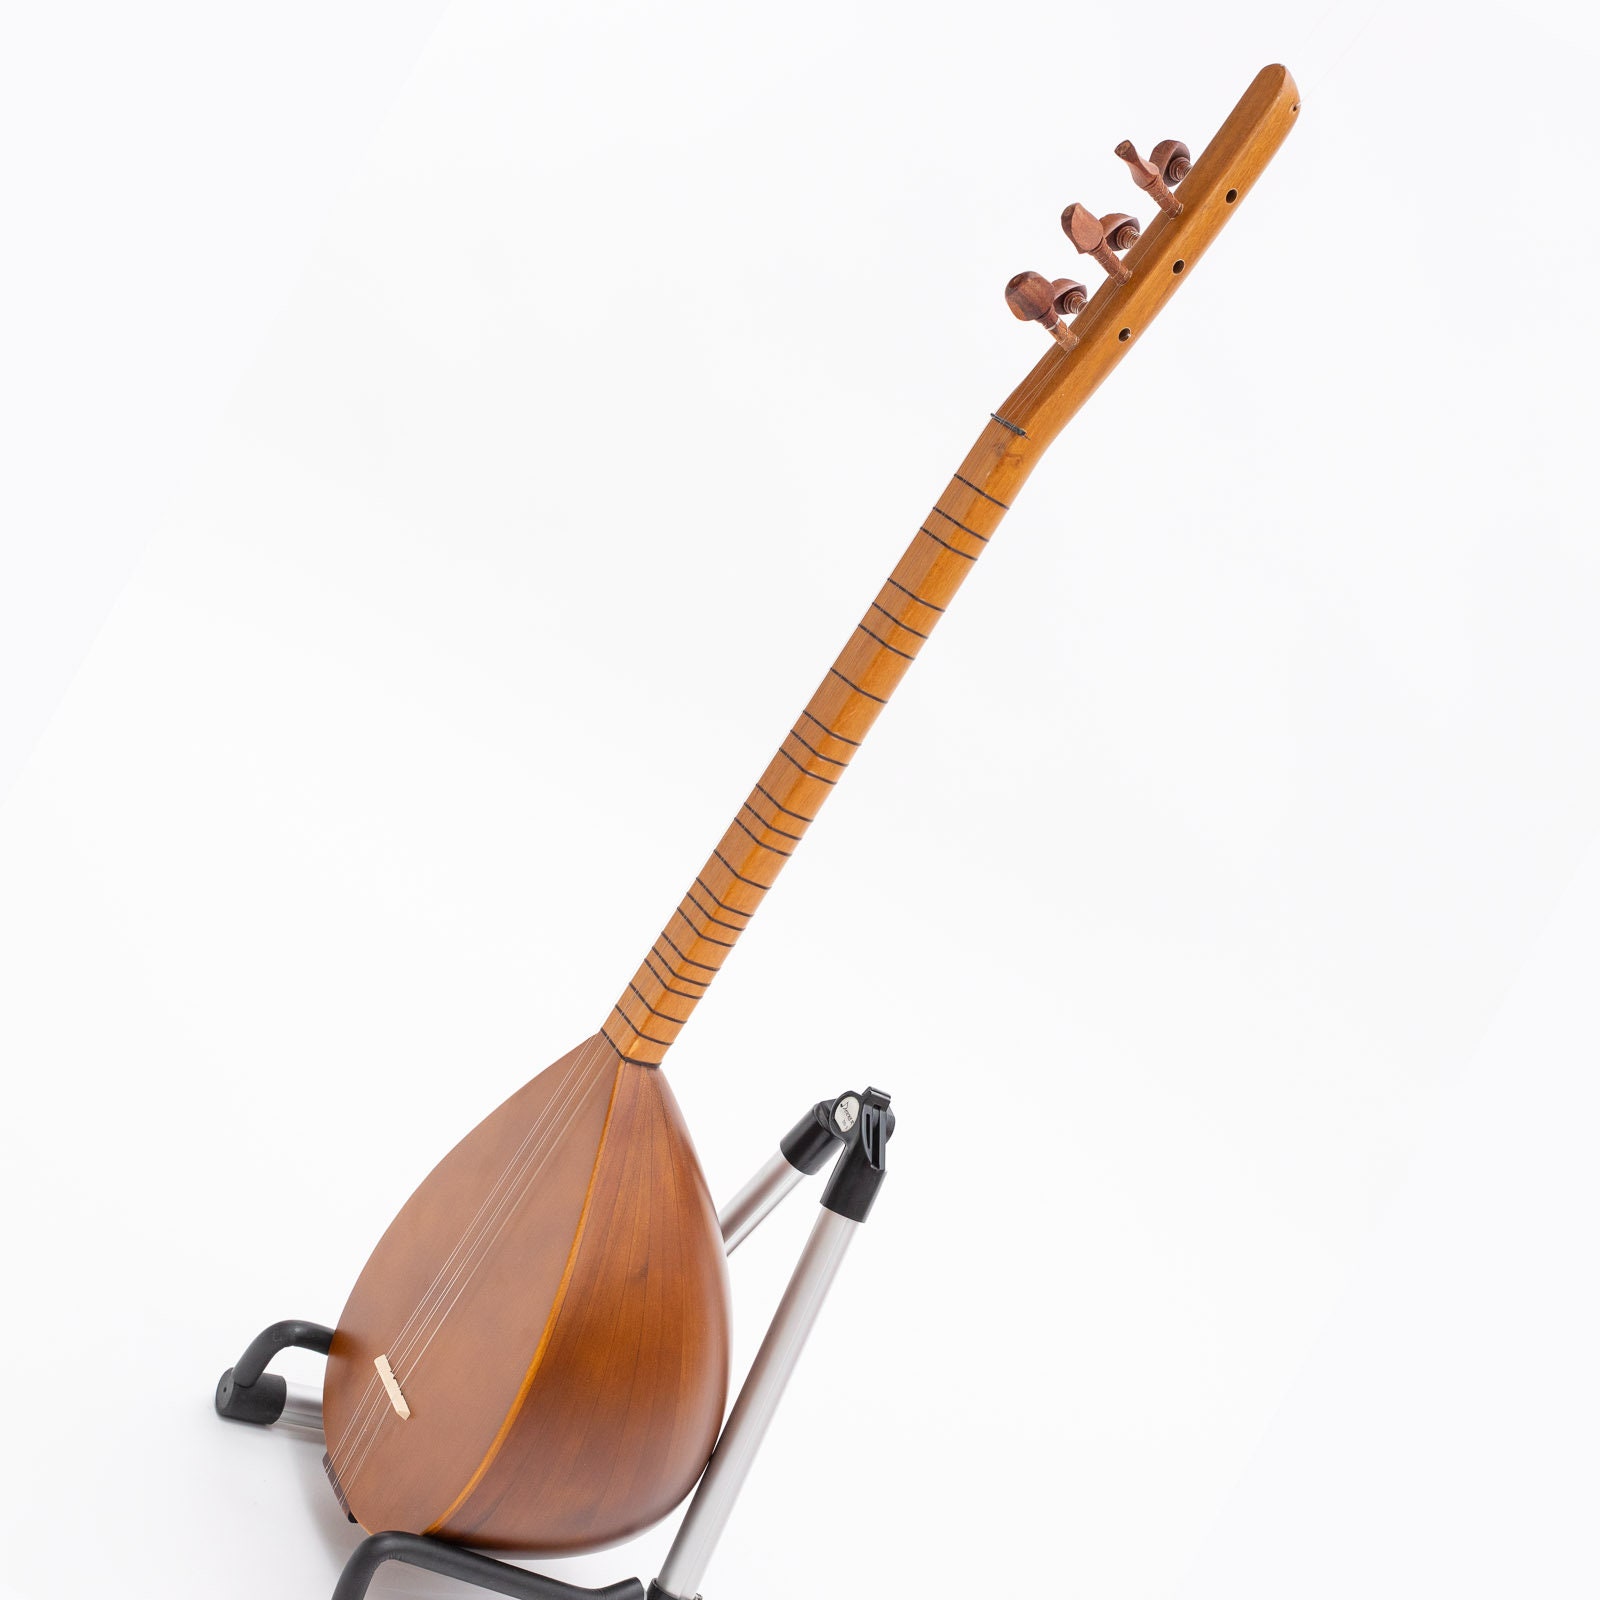 Turkish Baglama Short Neck Saz Made of Solid Cherry Wood With